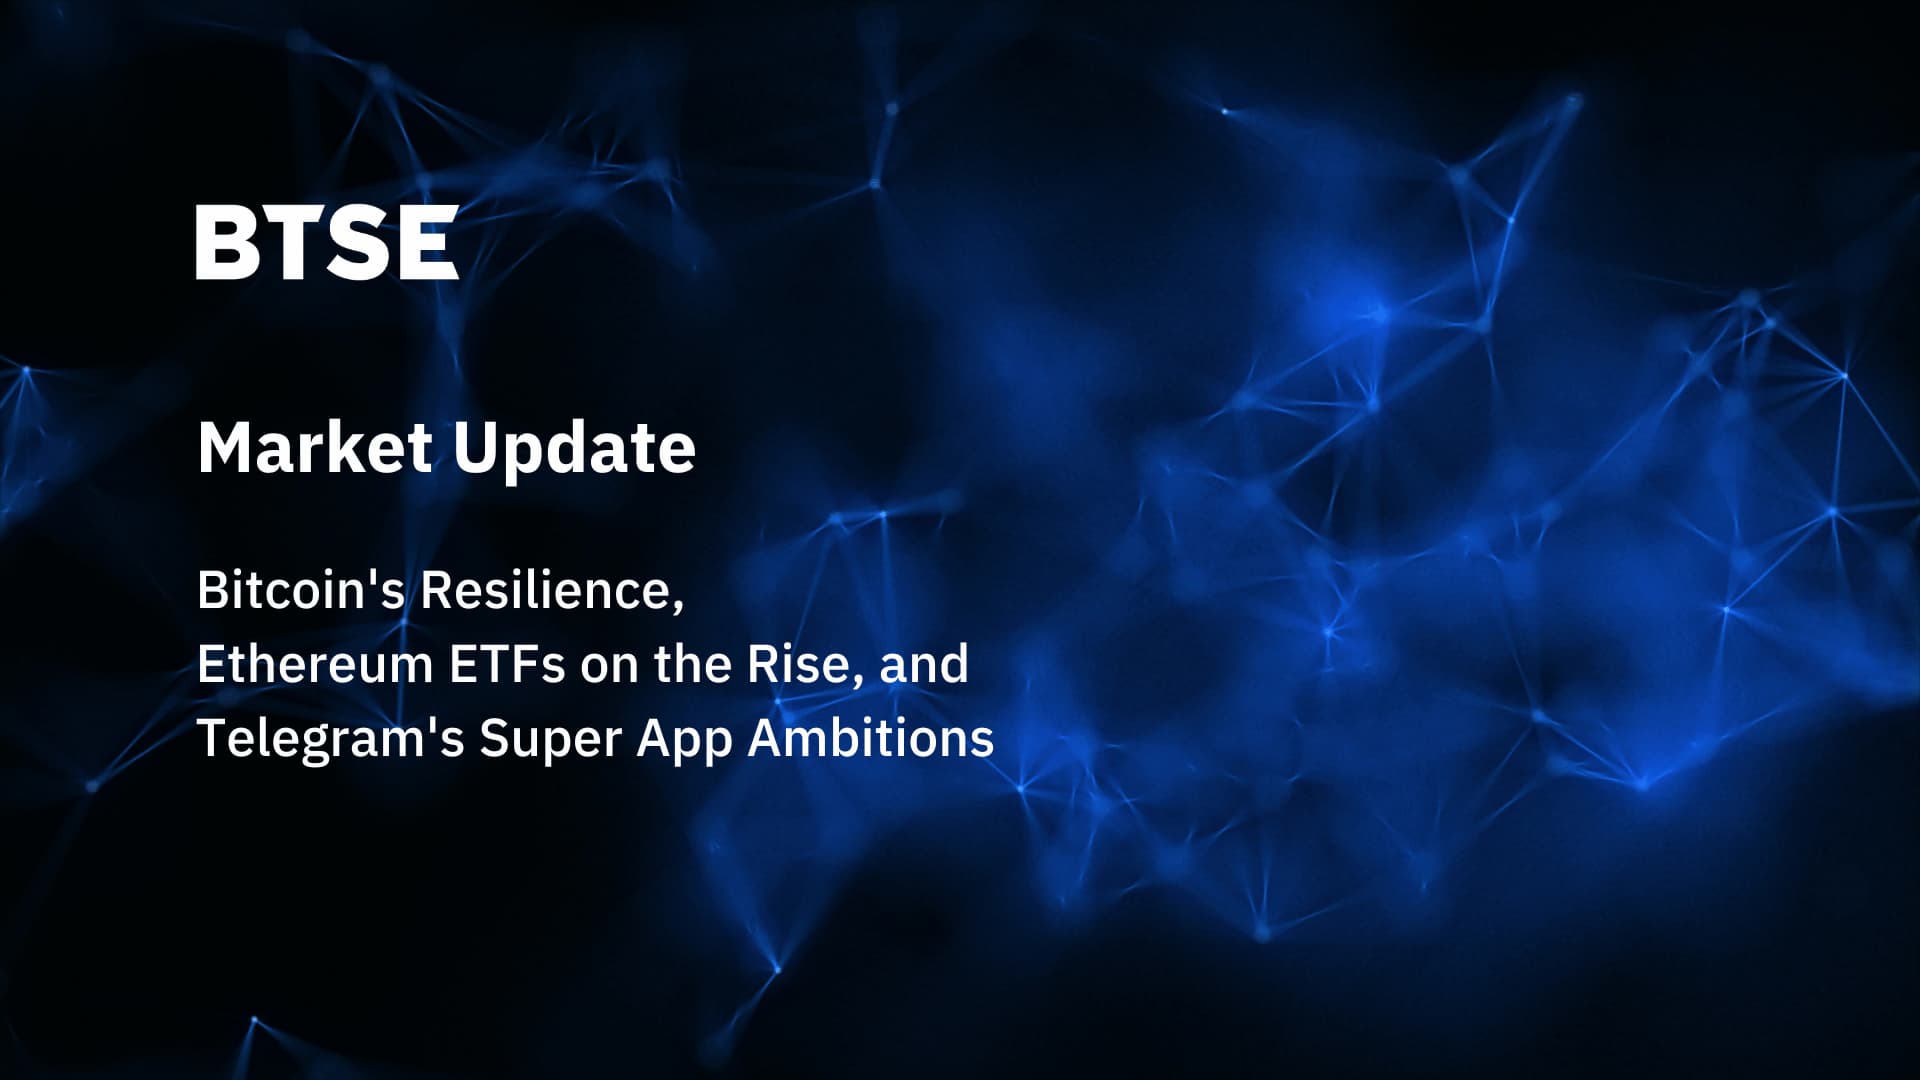 Bitcoin’s Resilience, Ethereum ETFs on the Rise, and Telegram’s Super App Ambitions